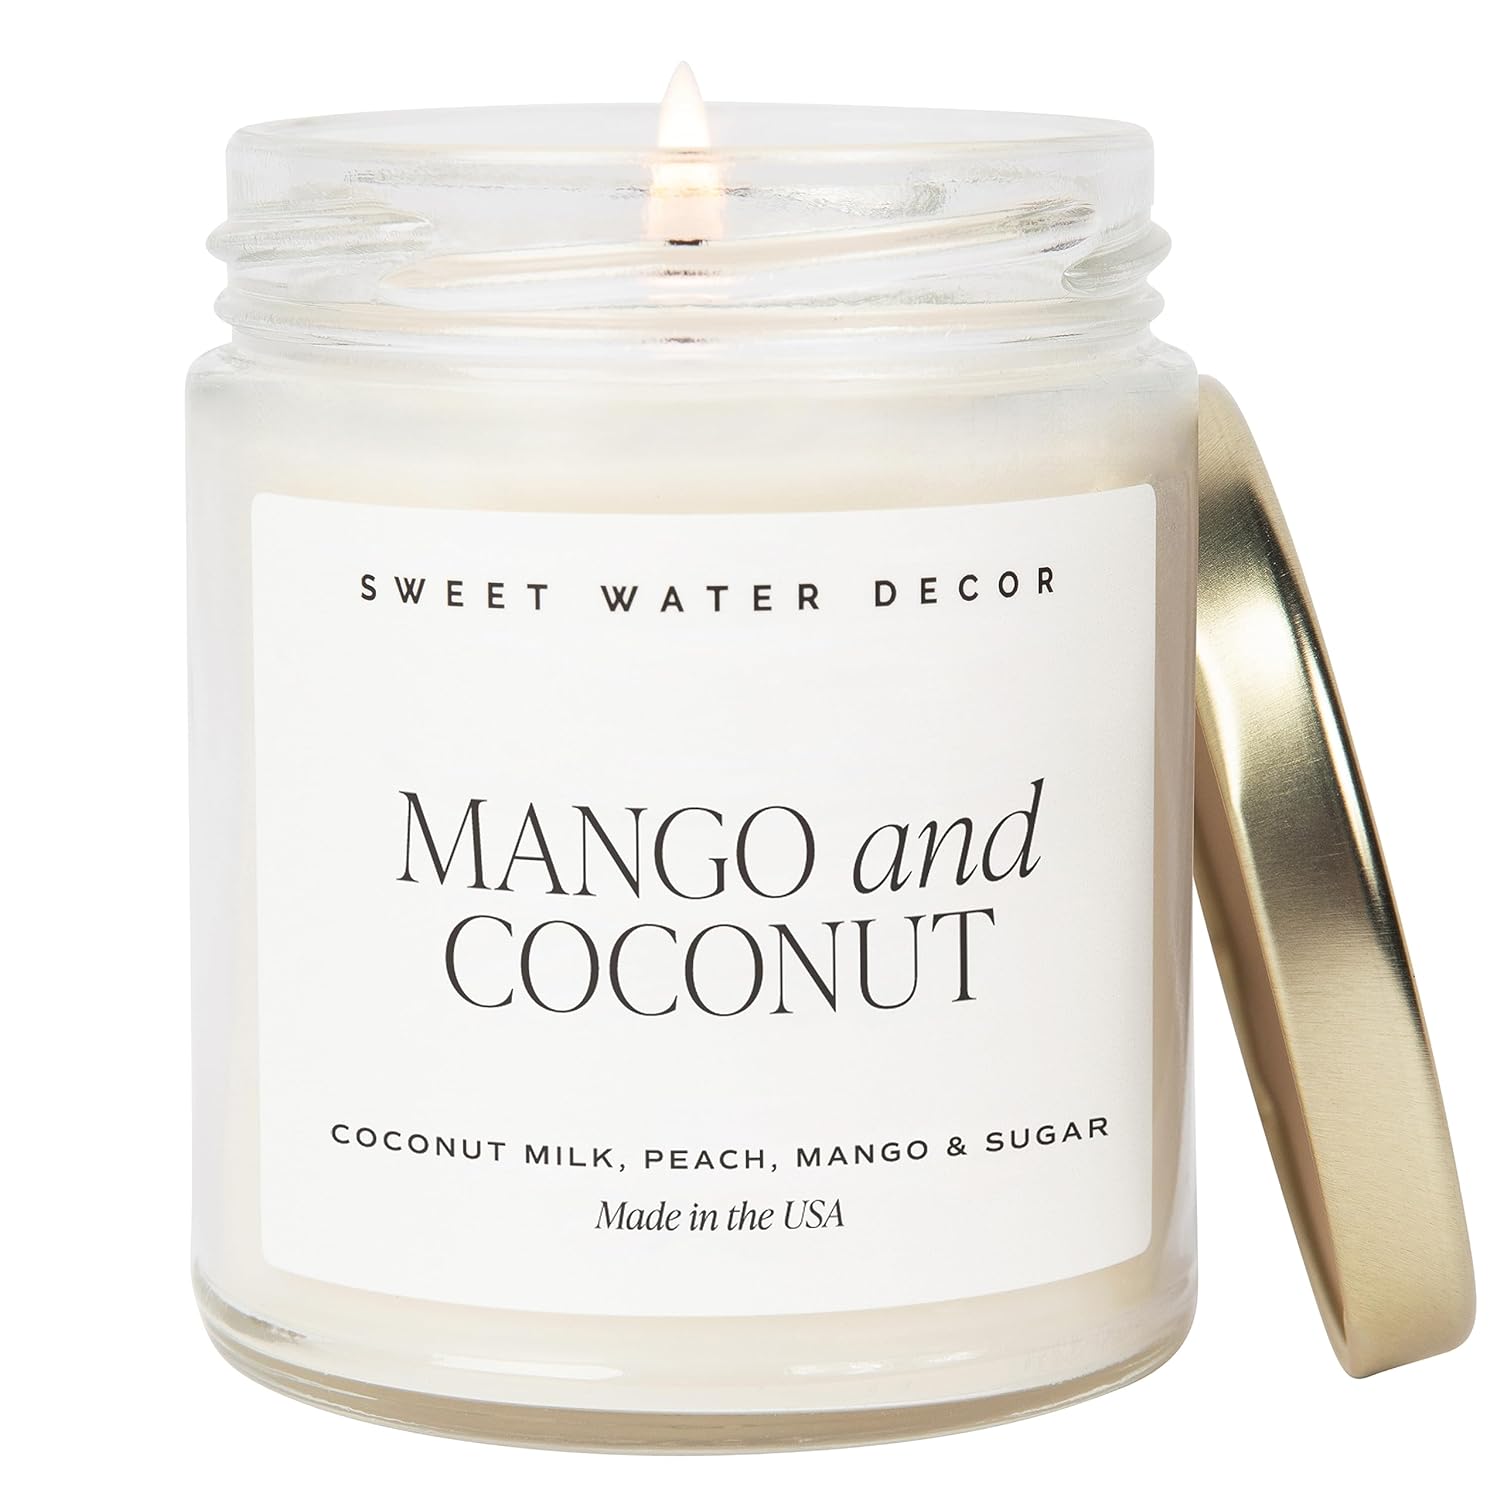 Sweet Water Decor Mango & Coconut Soy Candle - Pineapple, Mango and Orange Scented Summer Candles for Home - 9oz Clear Jar + Gold Lid, 40+ Hour Burn Time, Made in the USA